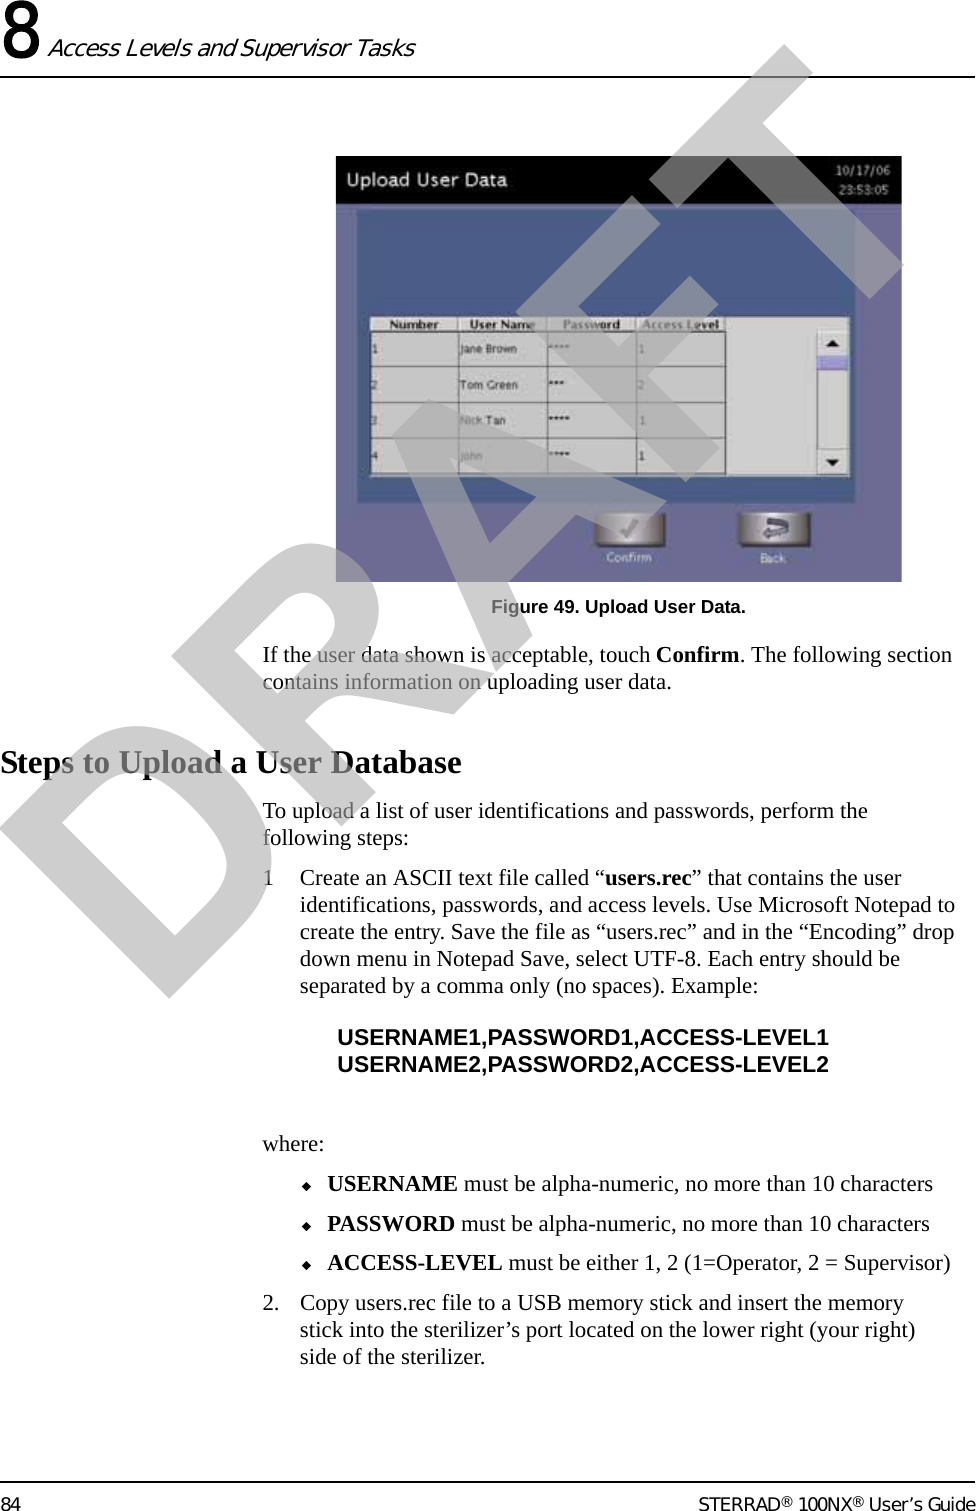 8 Access Levels and Supervisor Tasks84 STERRAD® 100NX® User’s GuideFigure 49. Upload User Data.If the user data shown is acceptable, touch Confirm. The following section contains information on uploading user data.Steps to Upload a User DatabaseTo upload a list of user identifications and passwords, perform the following steps:1 Create an ASCII text file called “users.rec” that contains the user identifications, passwords, and access levels. Use Microsoft Notepad to create the entry. Save the file as “users.rec” and in the “Encoding” drop down menu in Notepad Save, select UTF-8. Each entry should be separated by a comma only (no spaces). Example:USERNAME1,PASSWORD1,ACCESS-LEVEL1USERNAME2,PASSWORD2,ACCESS-LEVEL2where:◆USERNAME must be alpha-numeric, no more than 10 characters◆PASSWORD must be alpha-numeric, no more than 10 characters◆ACCESS-LEVEL must be either 1, 2 (1=Operator, 2 = Supervisor)2. Copy users.rec file to a USB memory stick and insert the memory stick into the sterilizer’s port located on the lower right (your right) side of the sterilizer.DRAFT